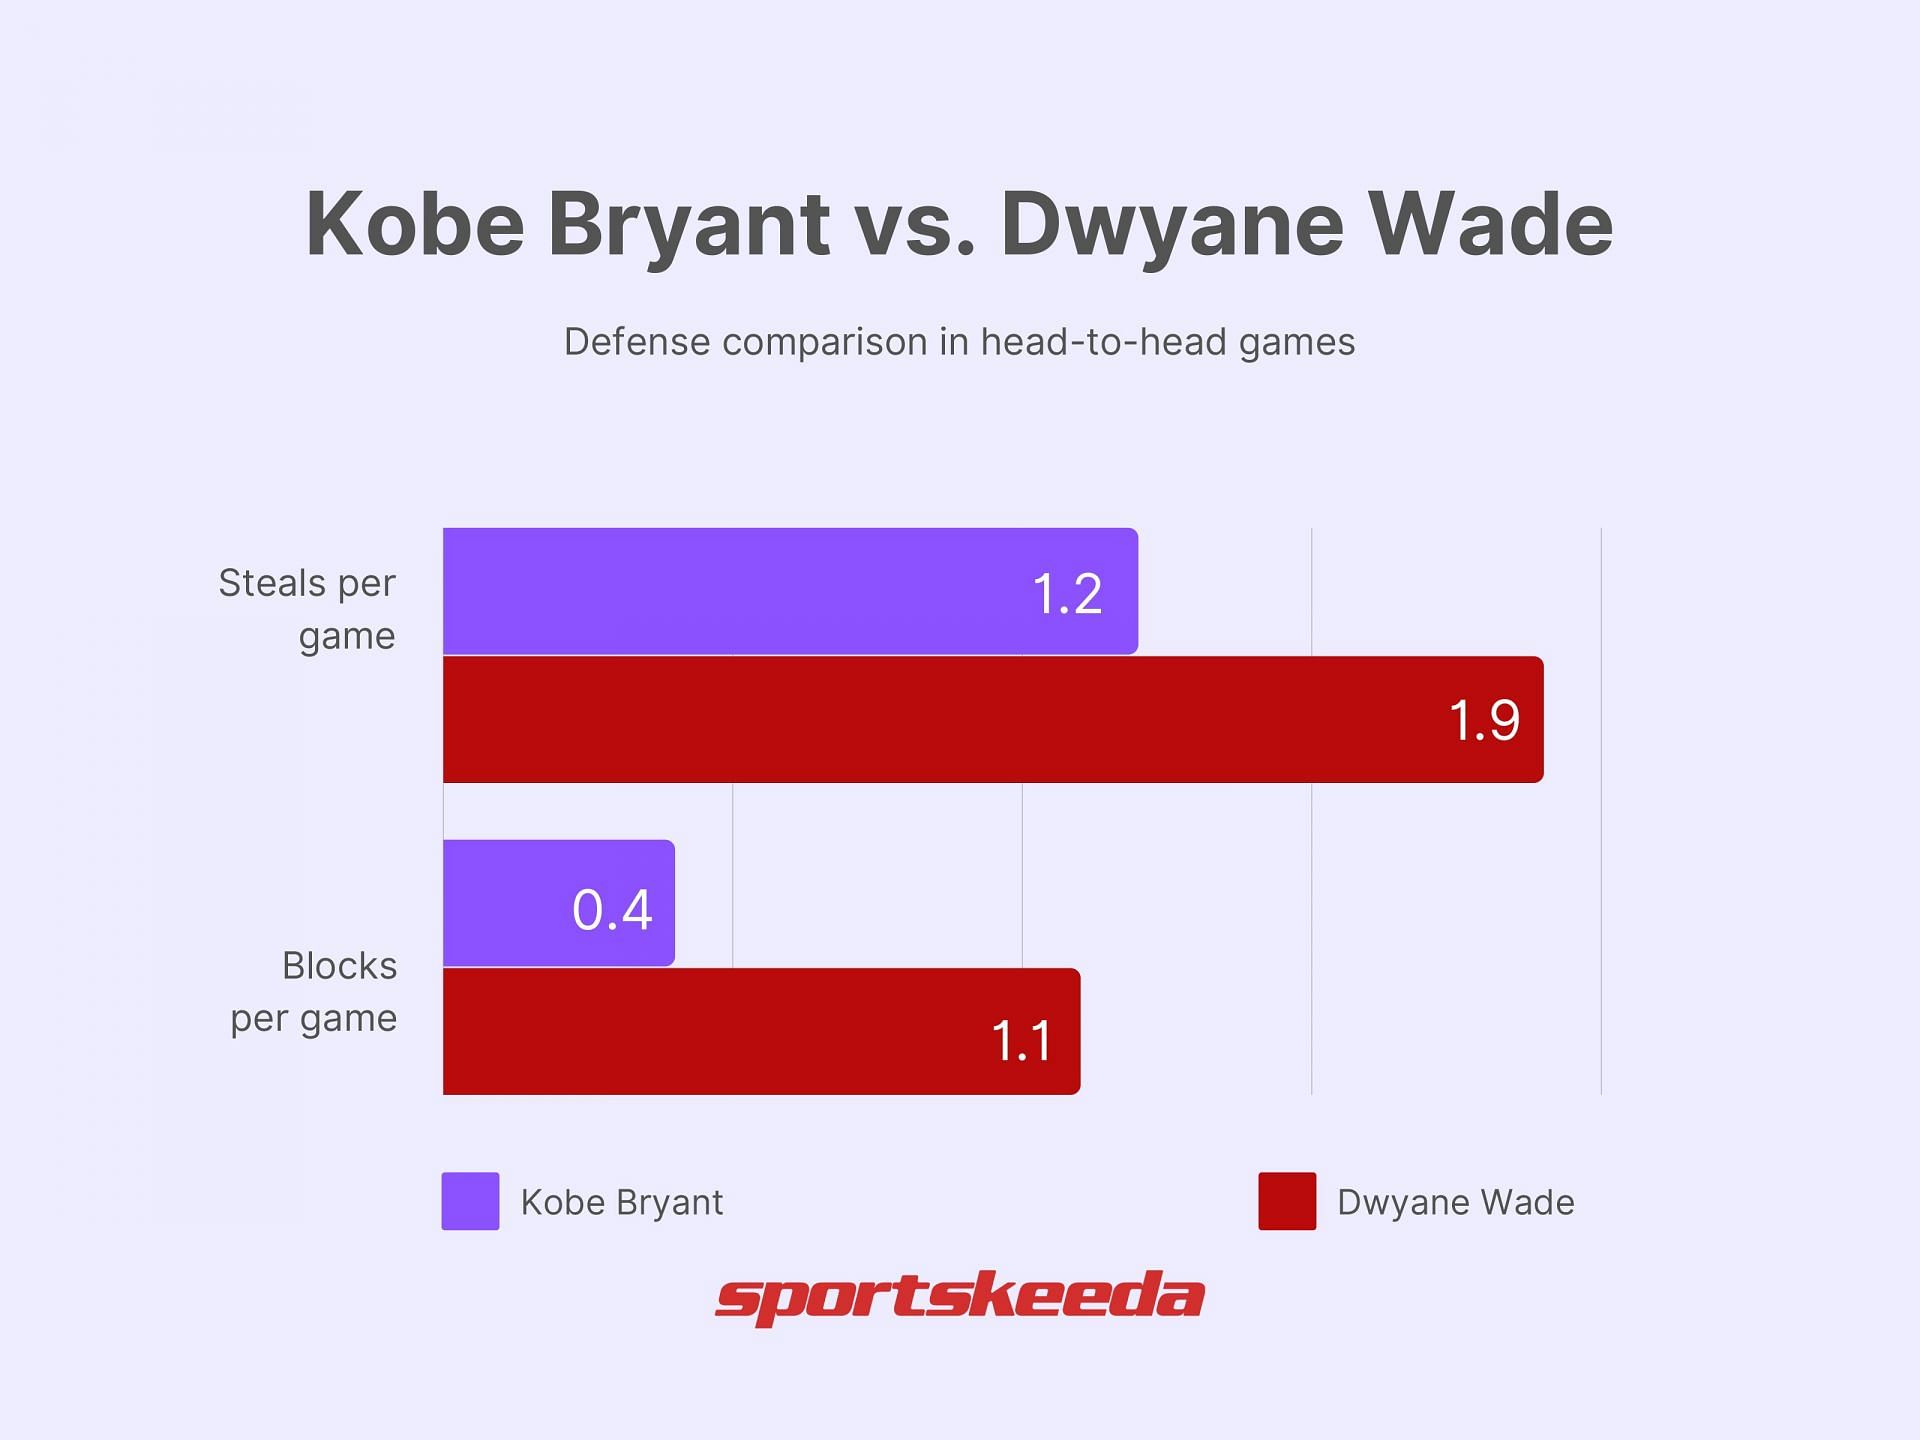 Wade was a beast on the defensive end of the floor, even against Bryant.